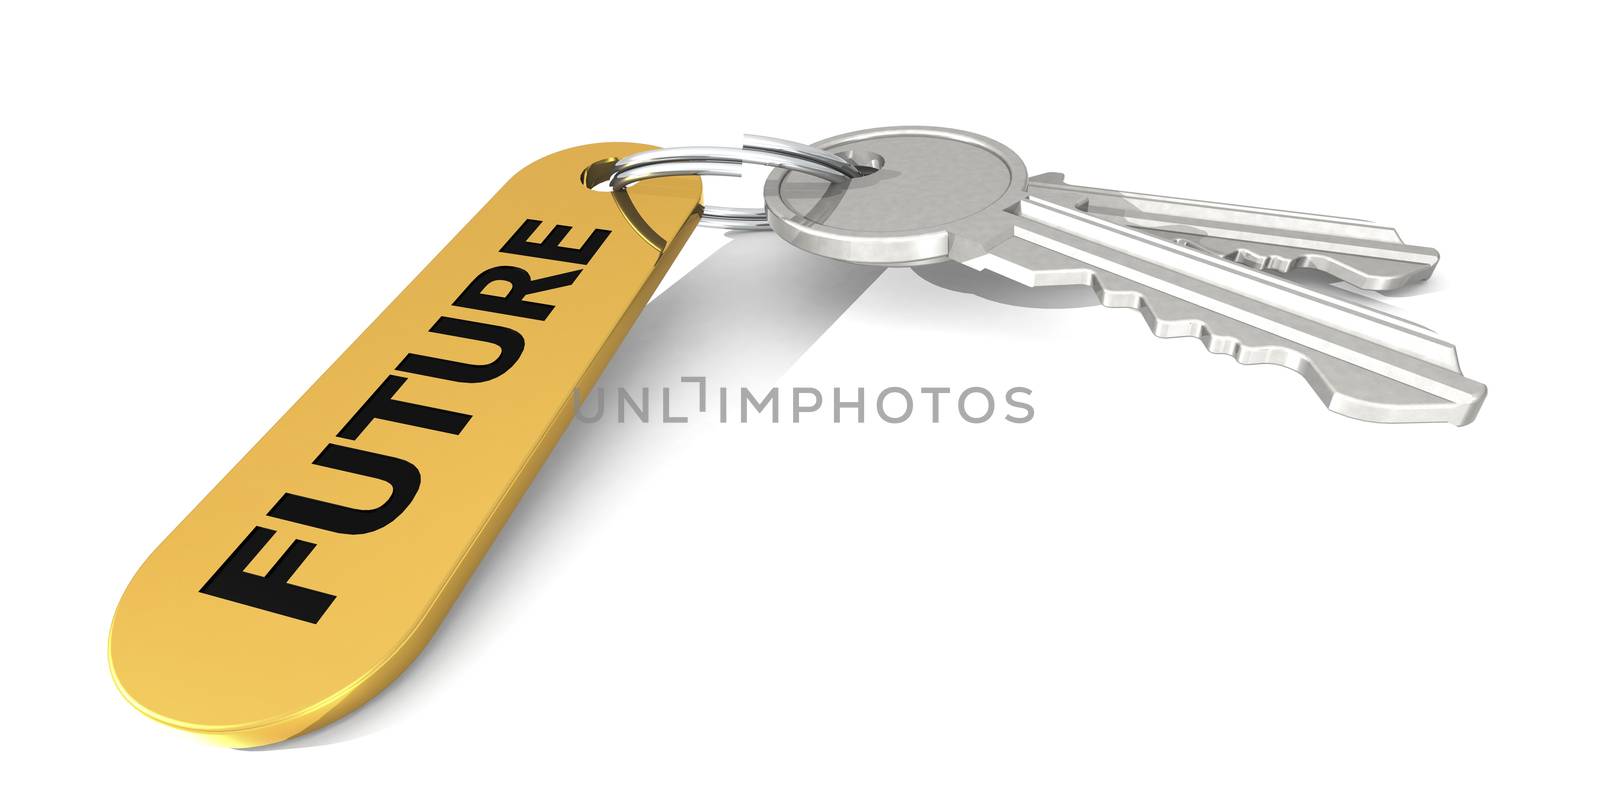 Future label attached to the keys by tang90246